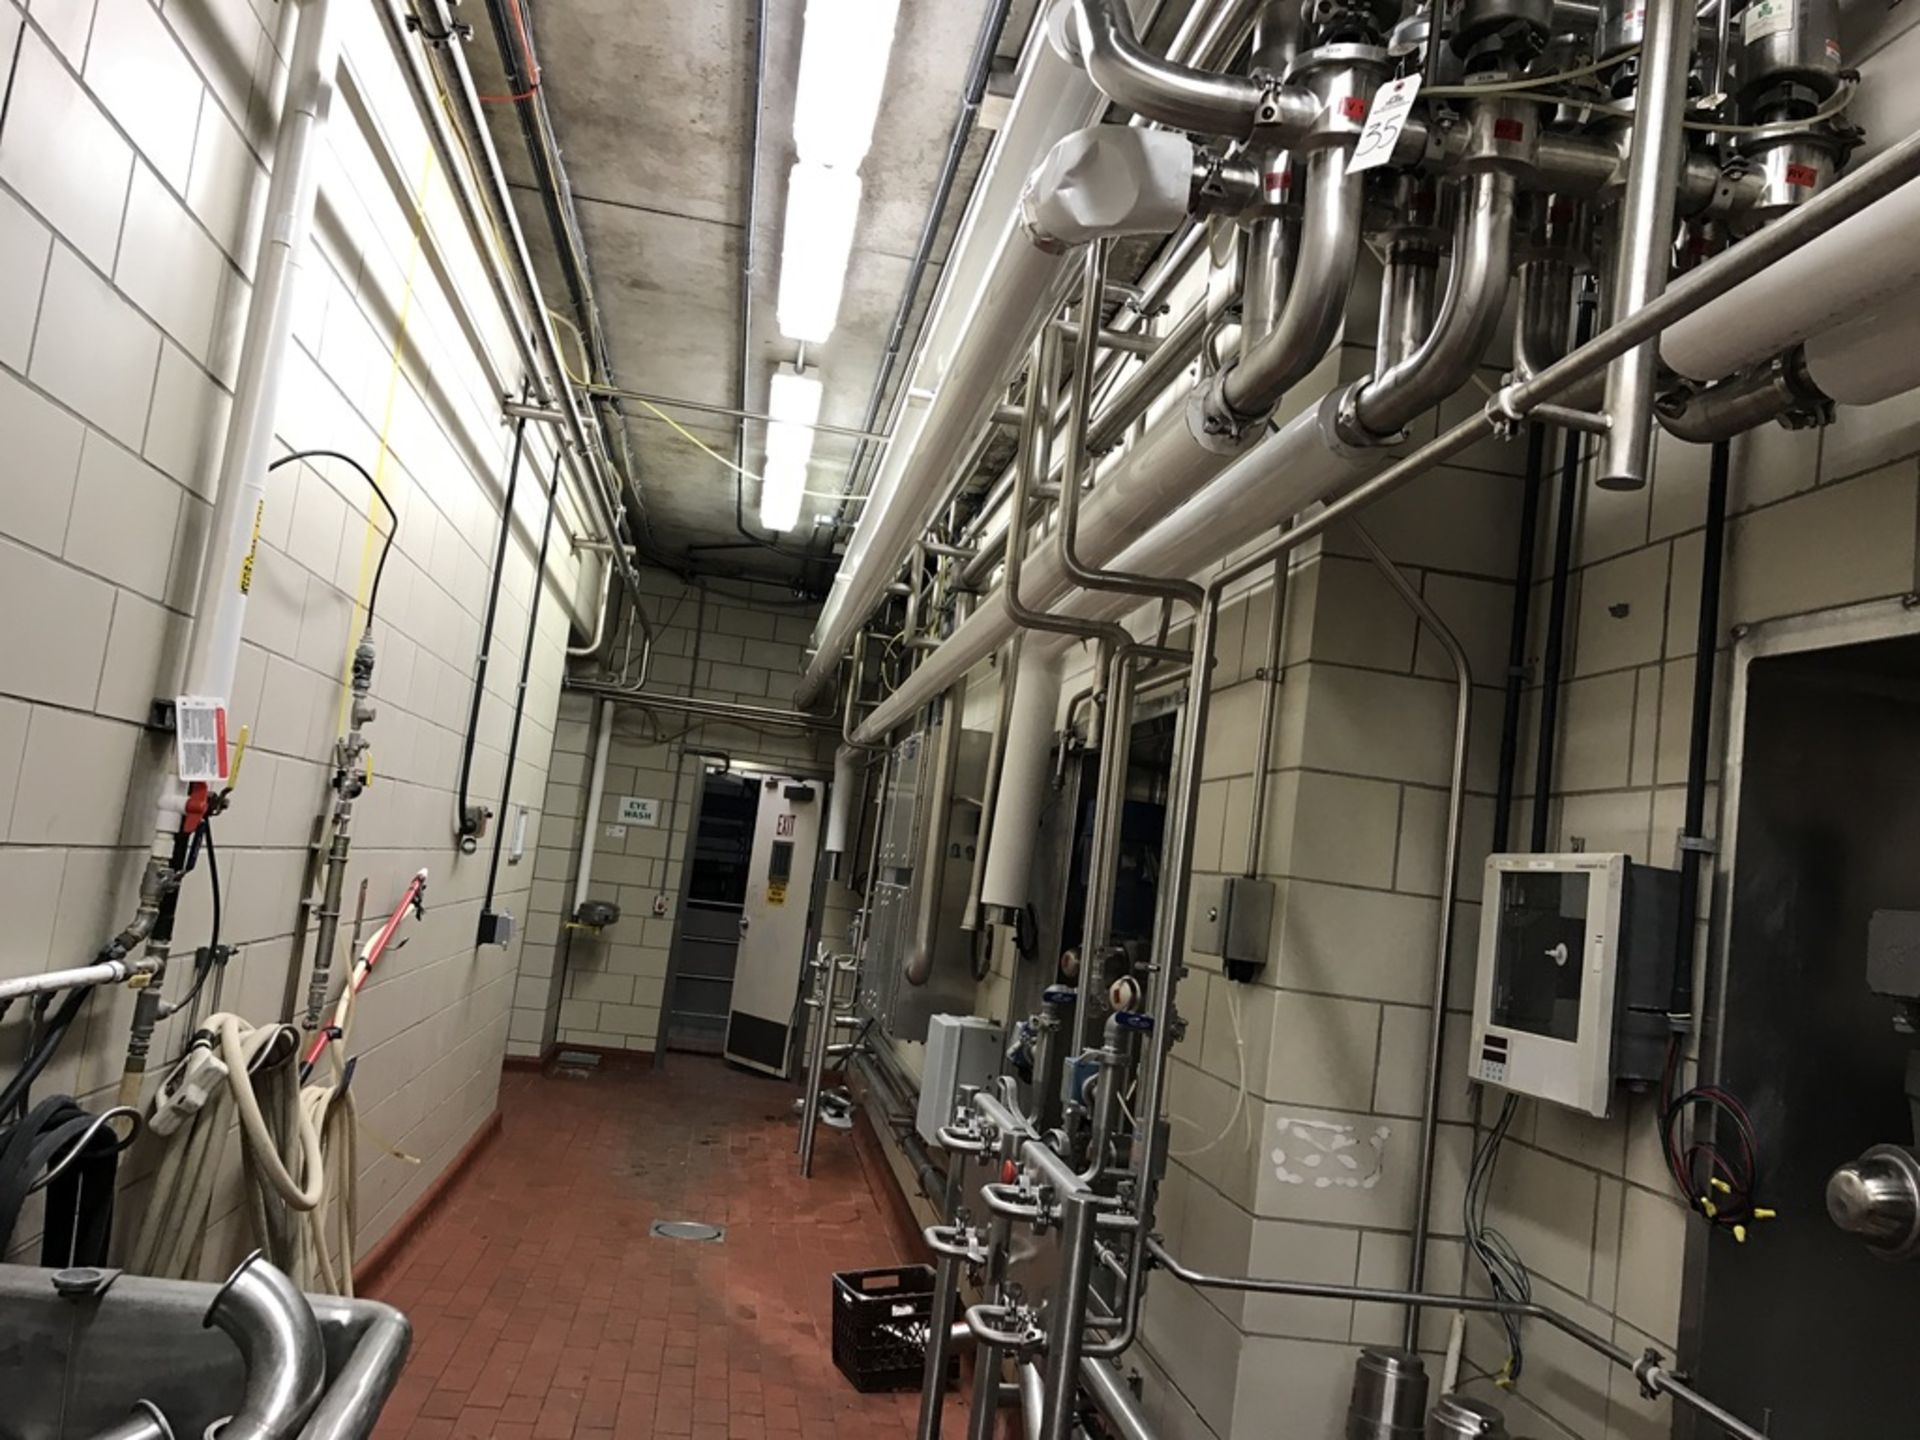 Stainless Steel Piping in Silo Room, Approx 600ft, (6) Flow Diverter Panels, (3) Ch | Rig Fee: $1500 - Bild 3 aus 4